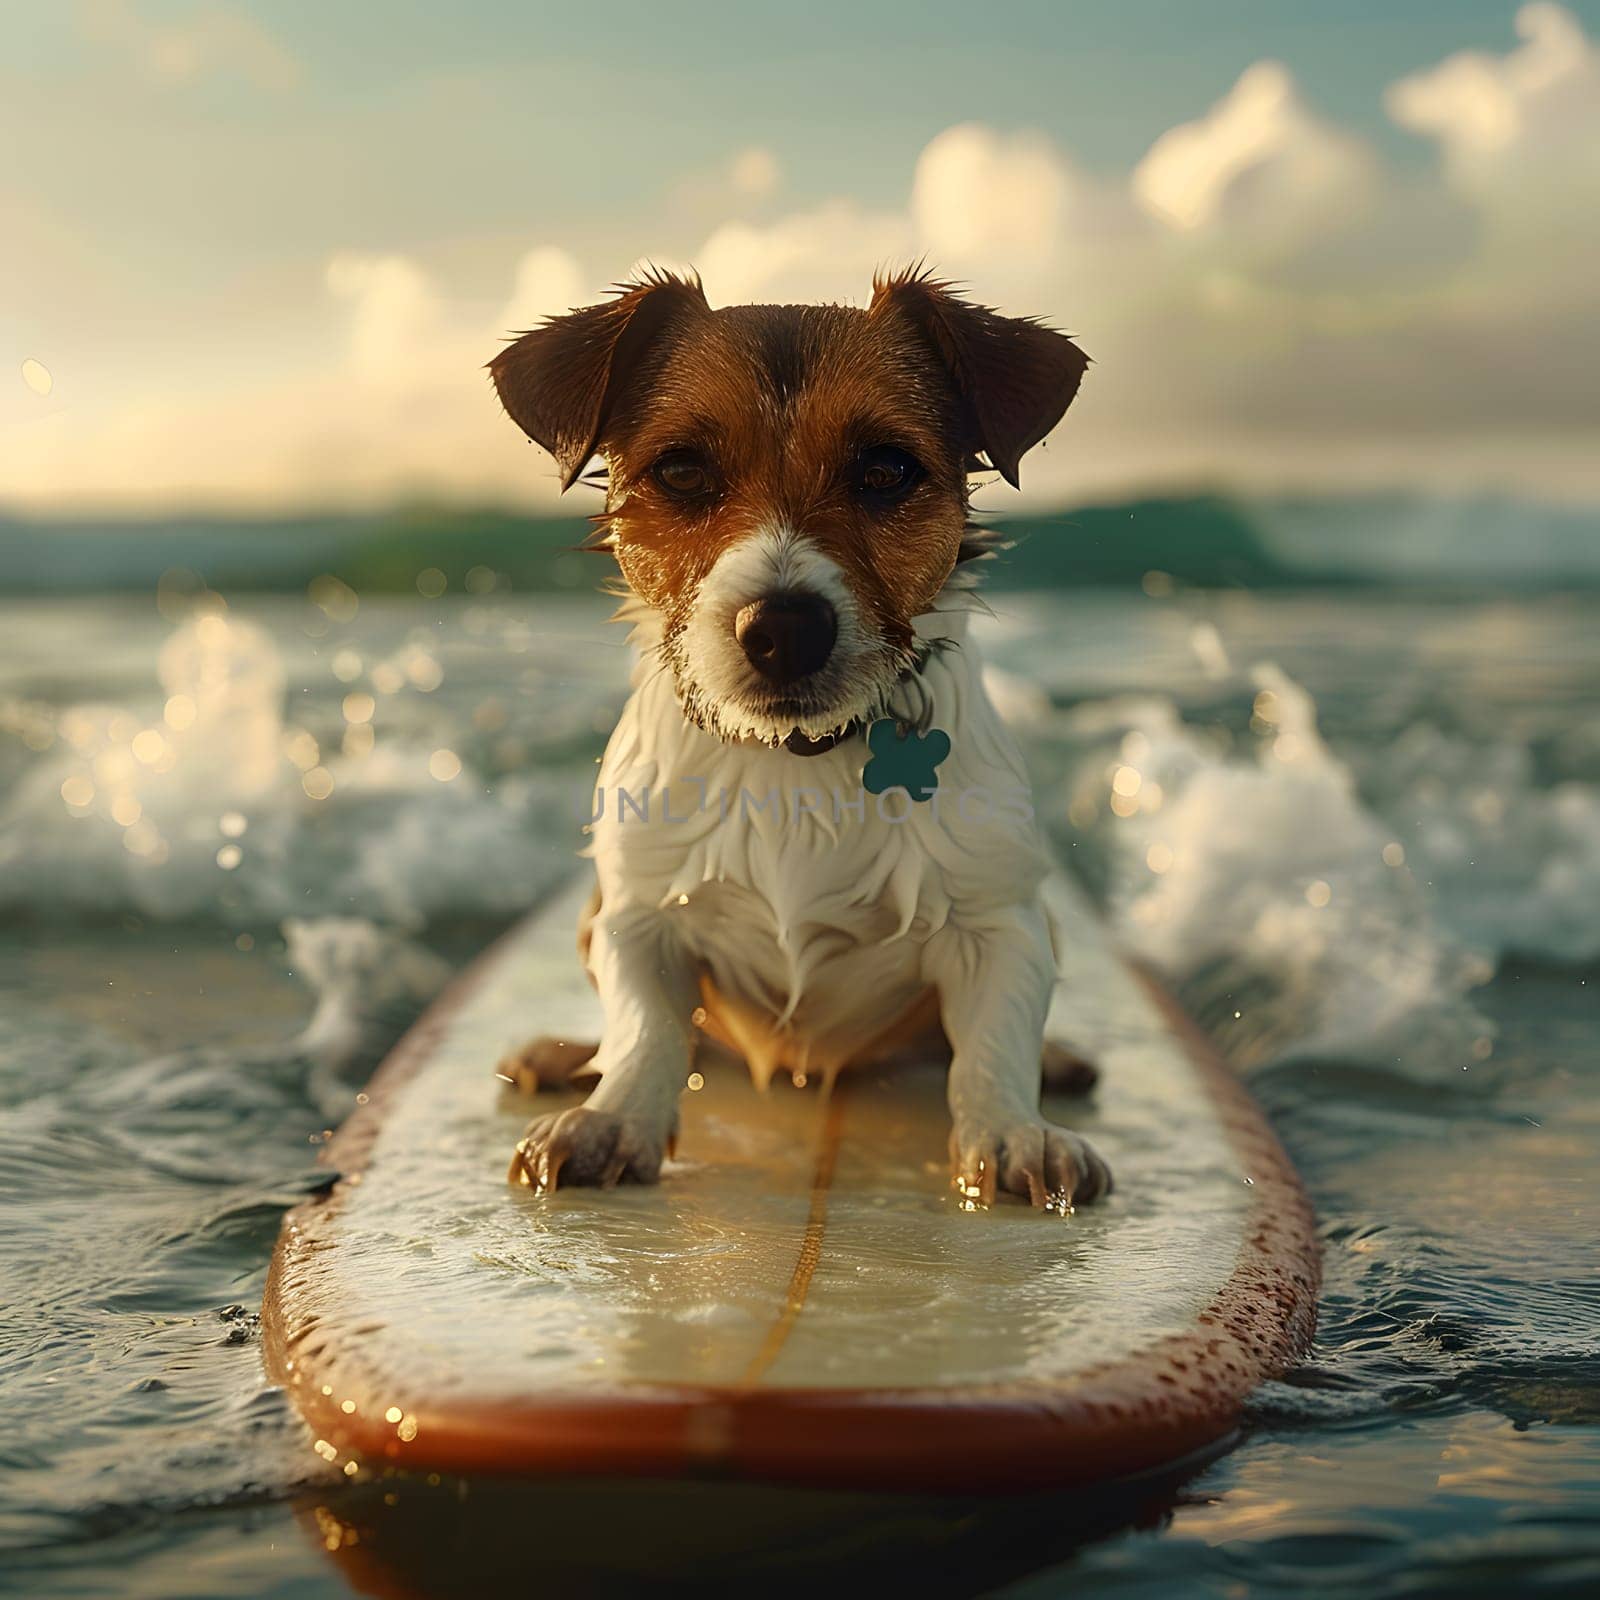 a dog is sitting on a surfboard in the ocean by Nadtochiy